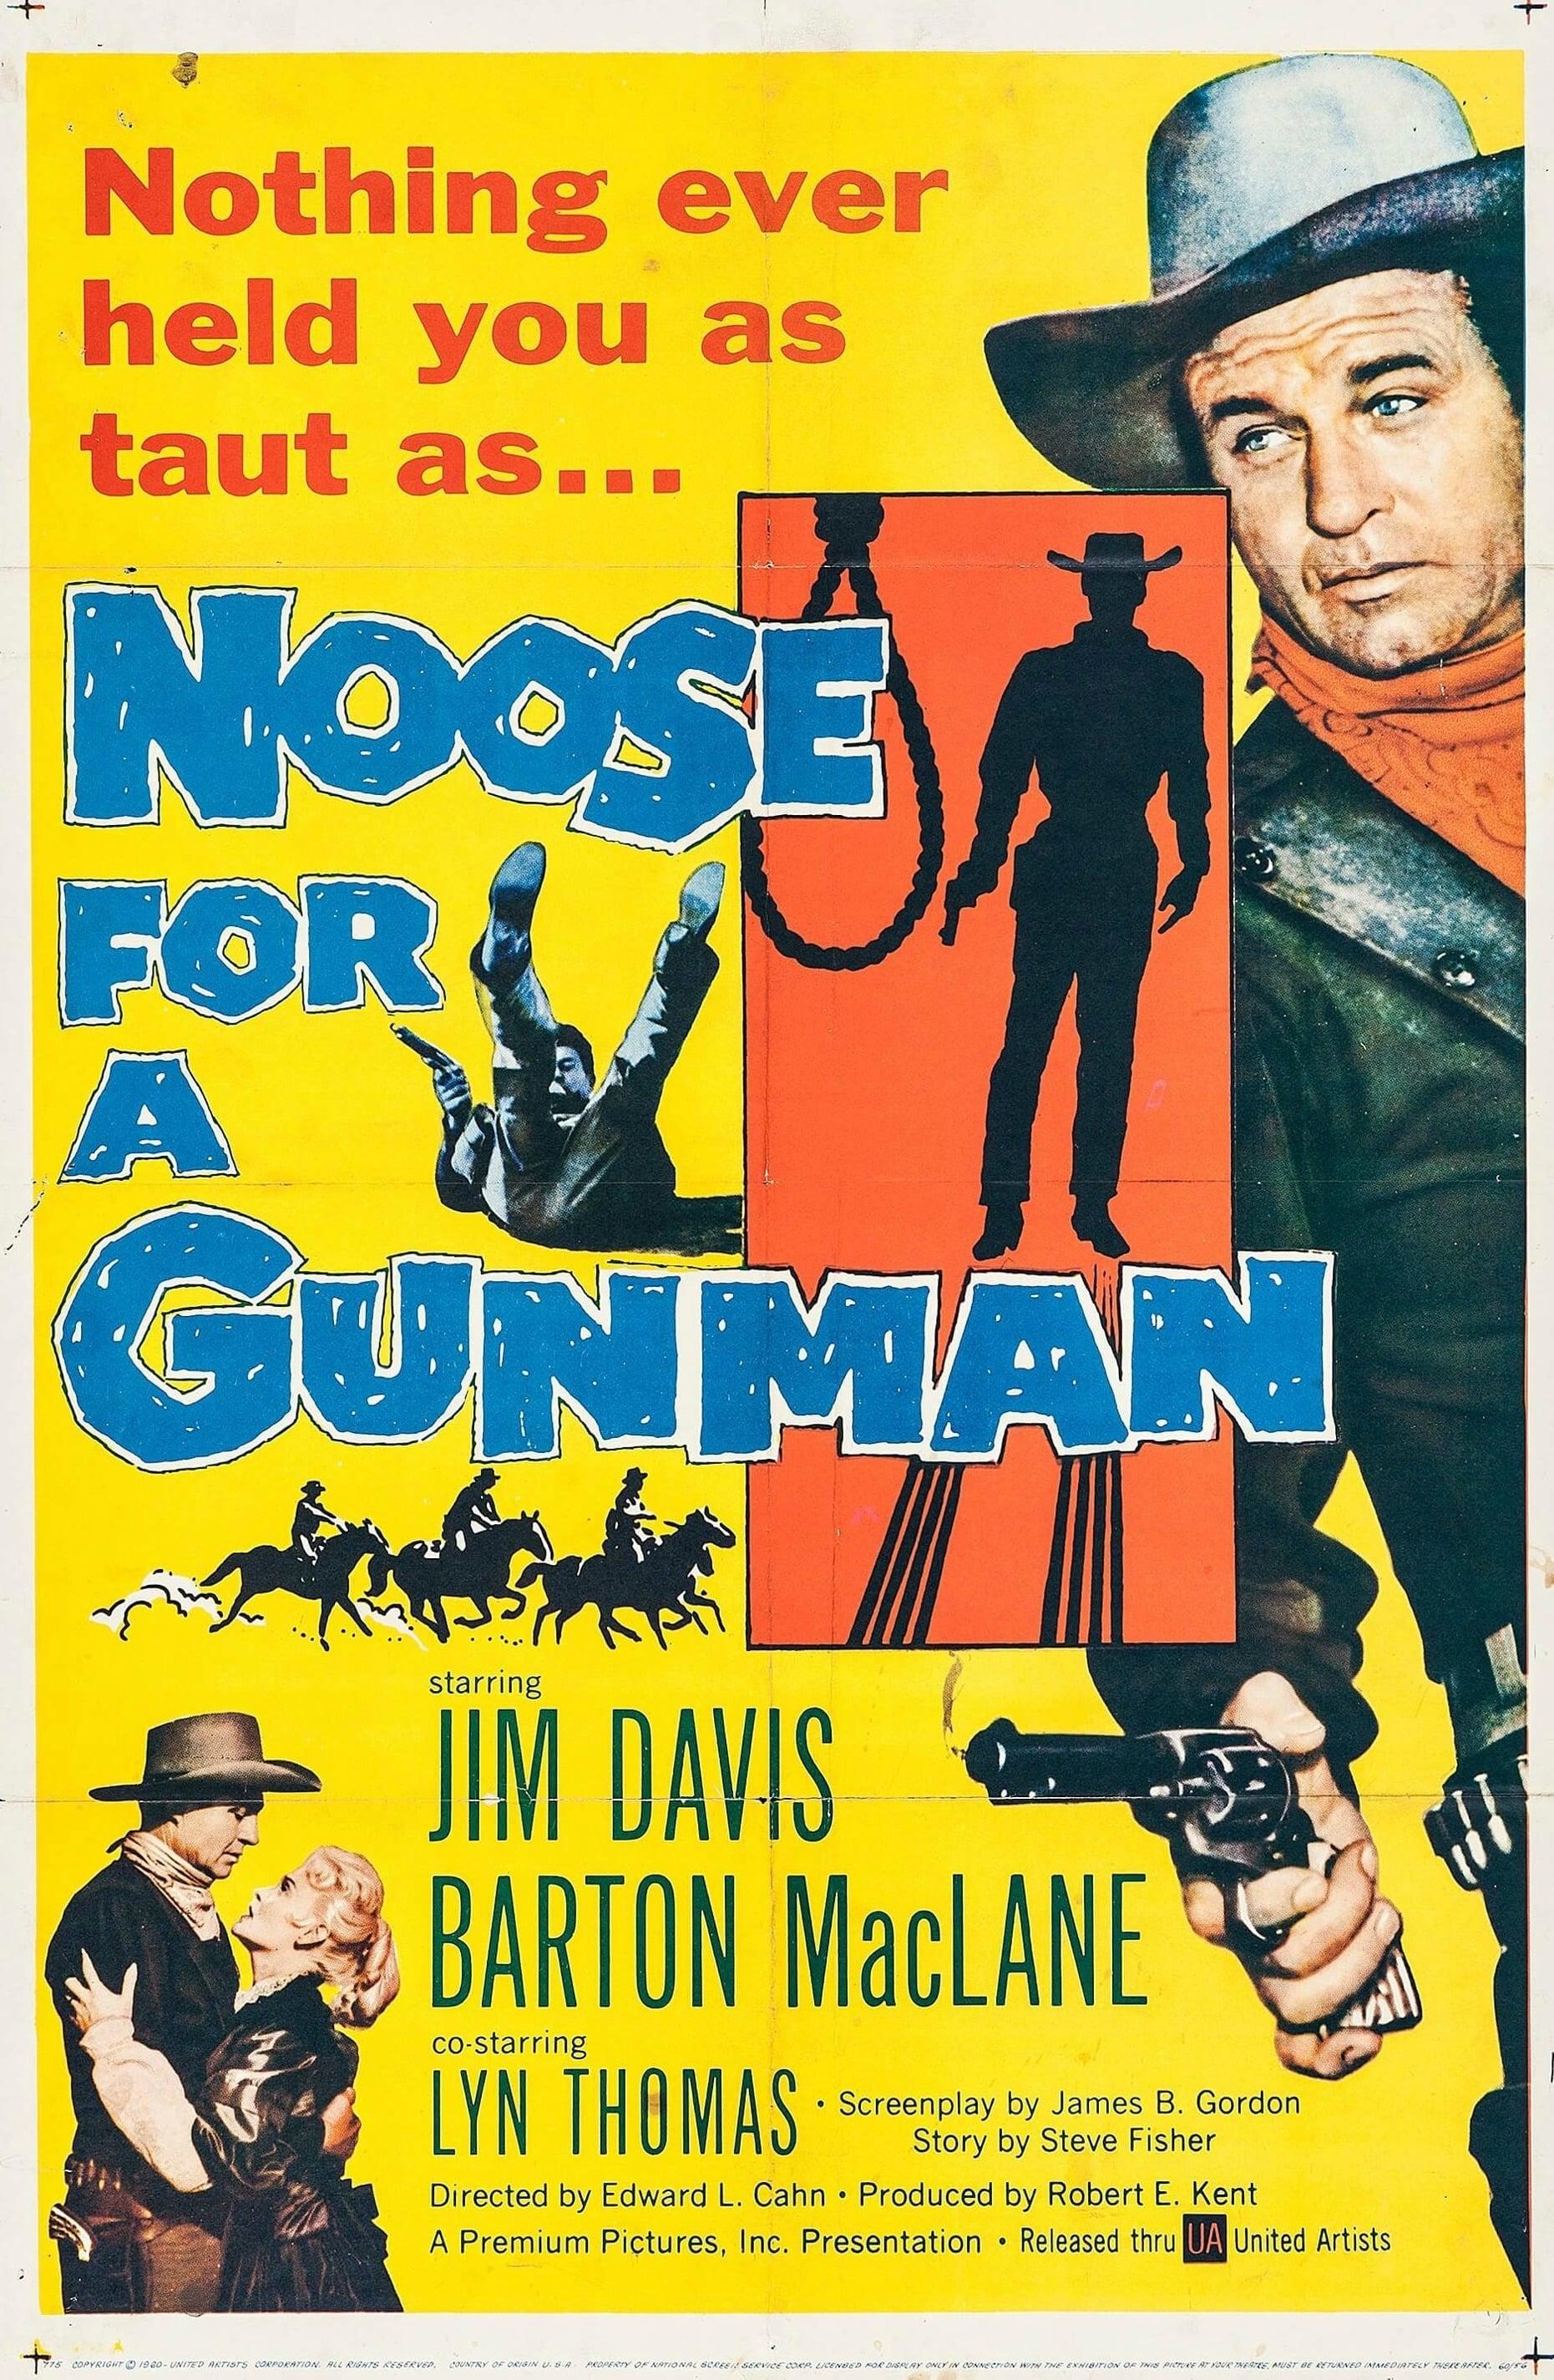 Noose for a Gunman poster